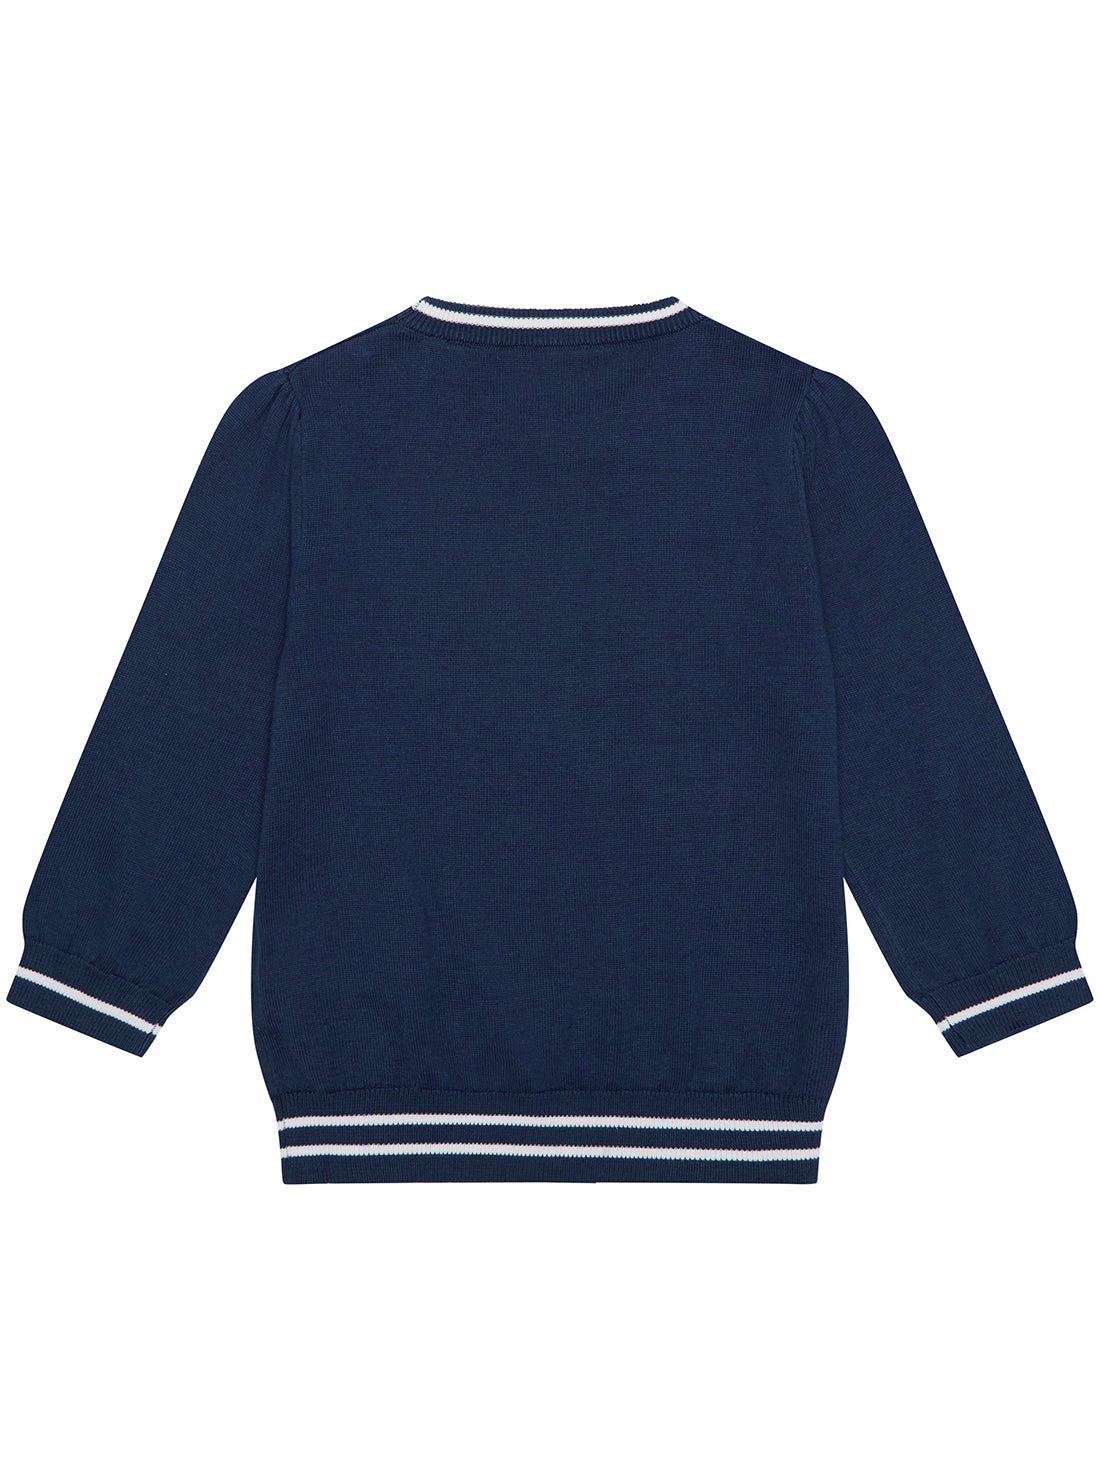 Navy 3/4 Sleeve Jumper (7-16) back view